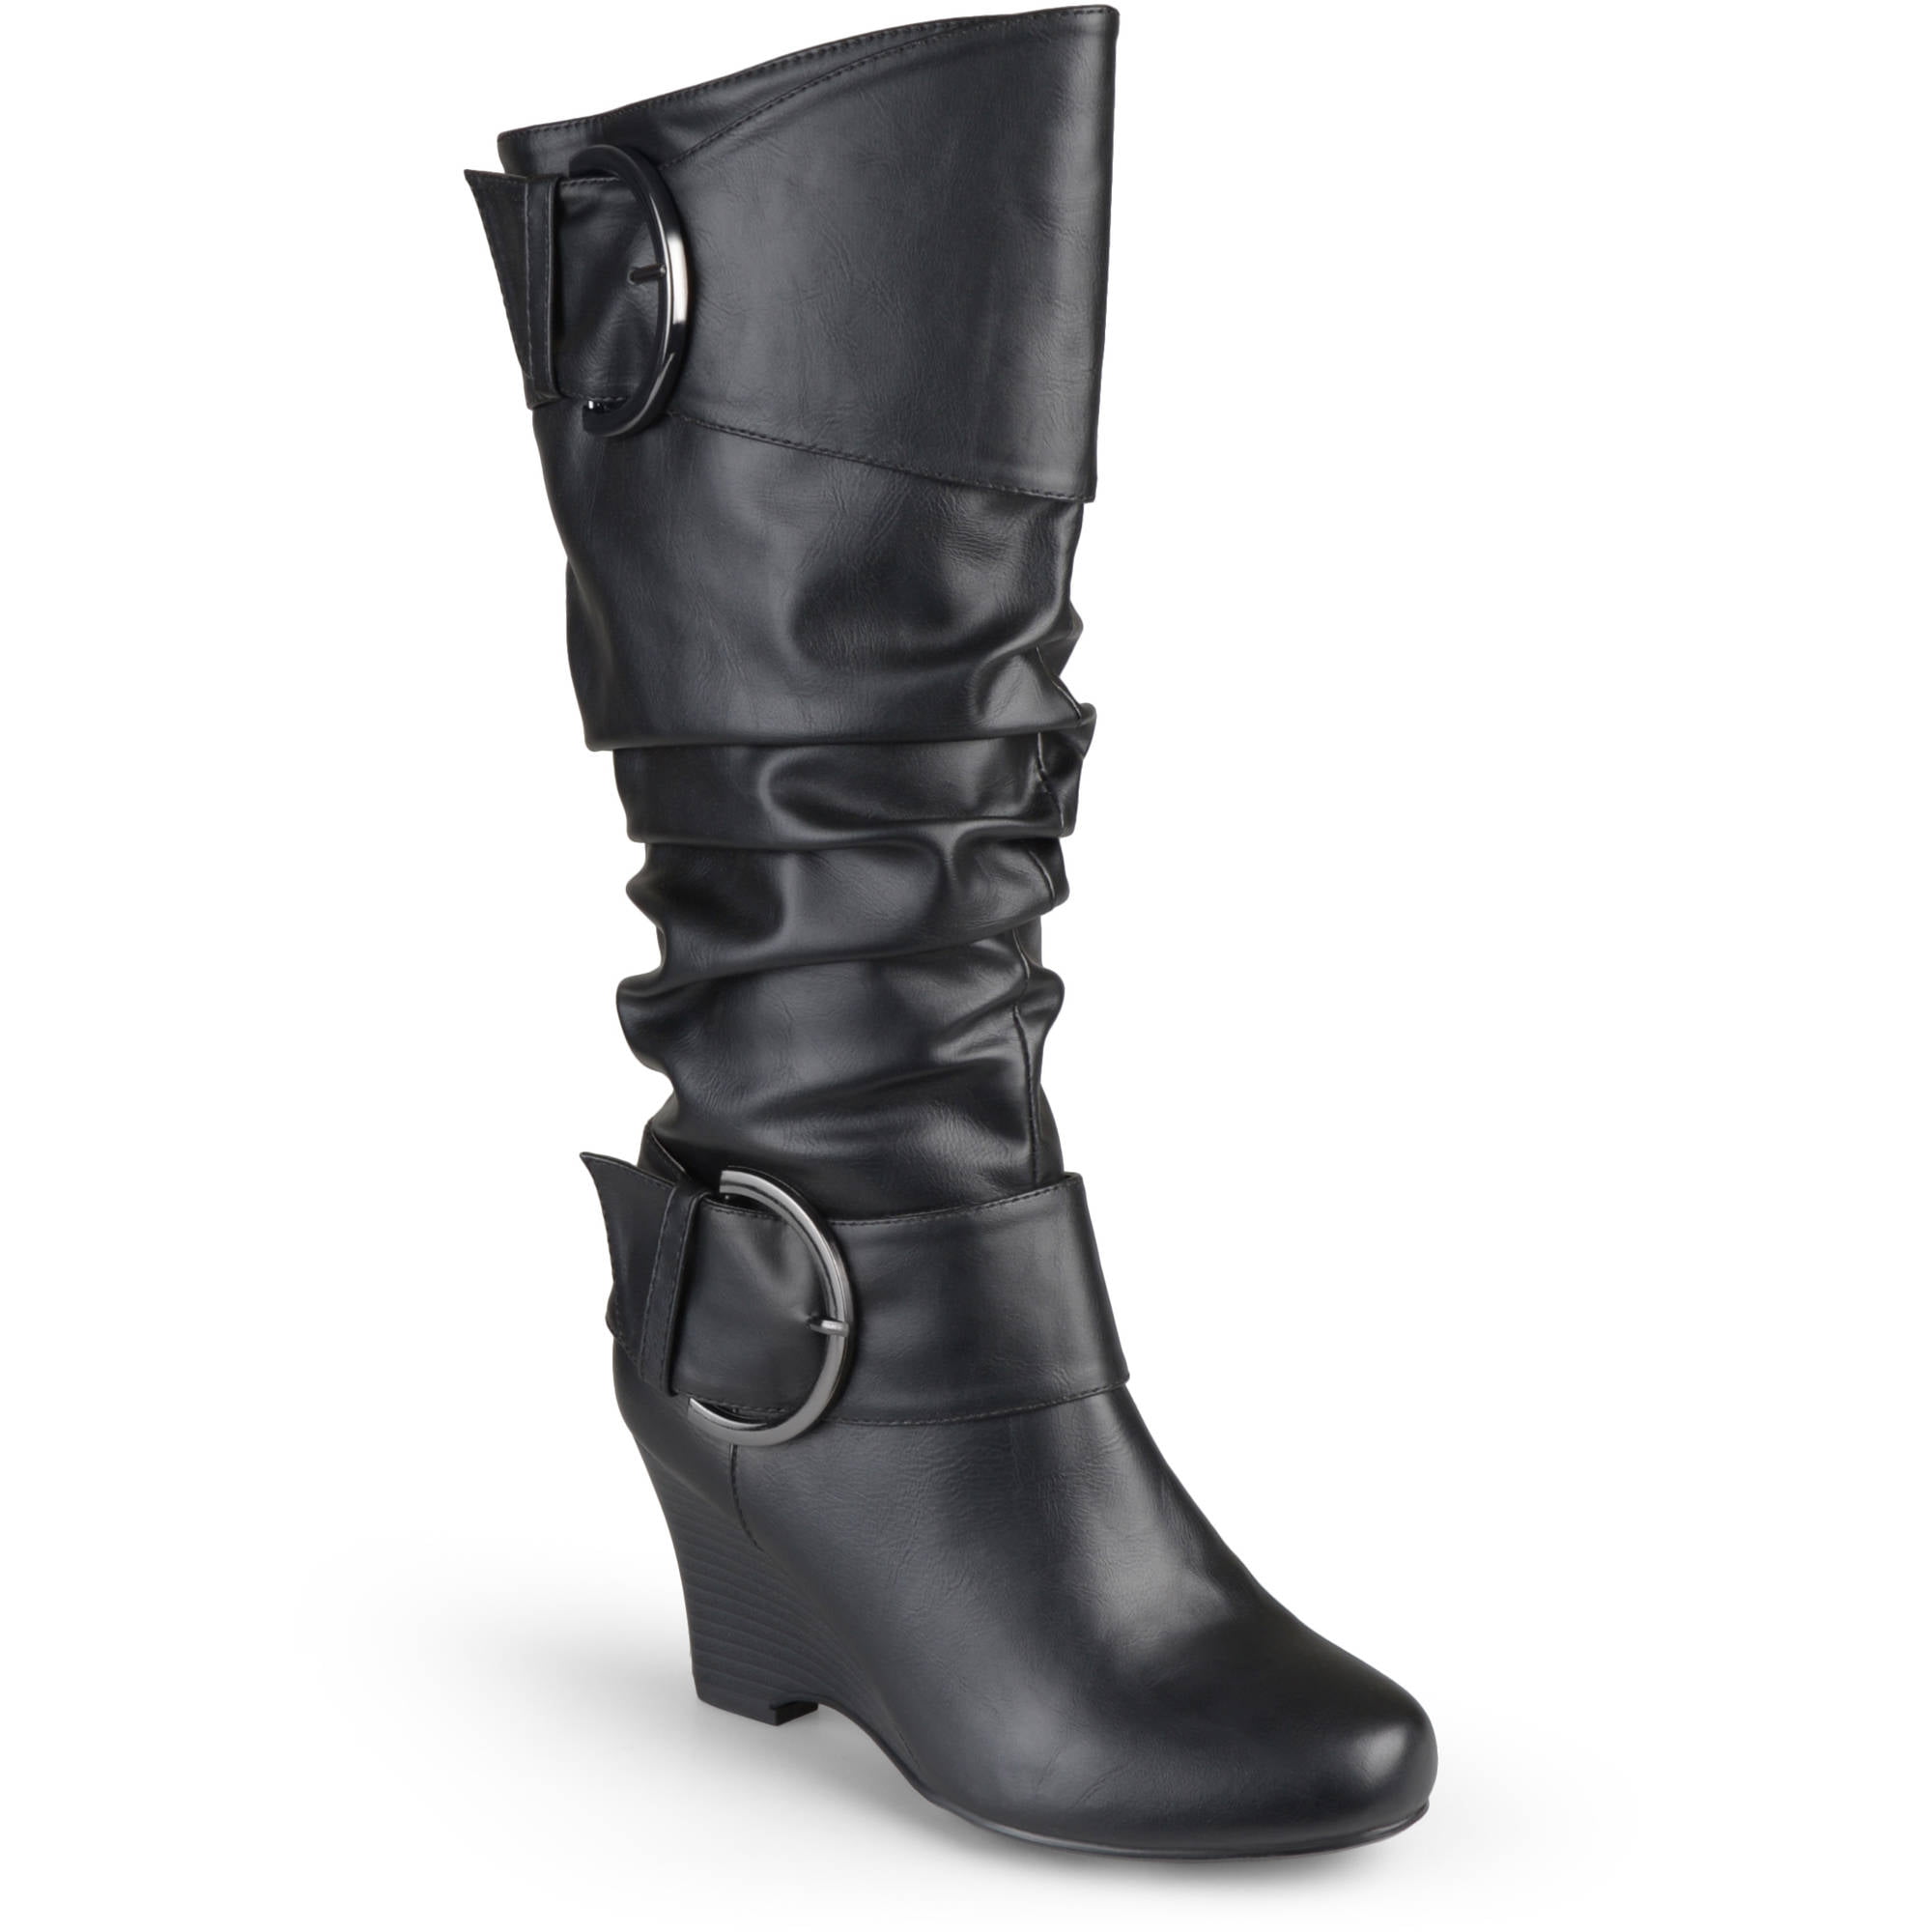 wide calf leather boots